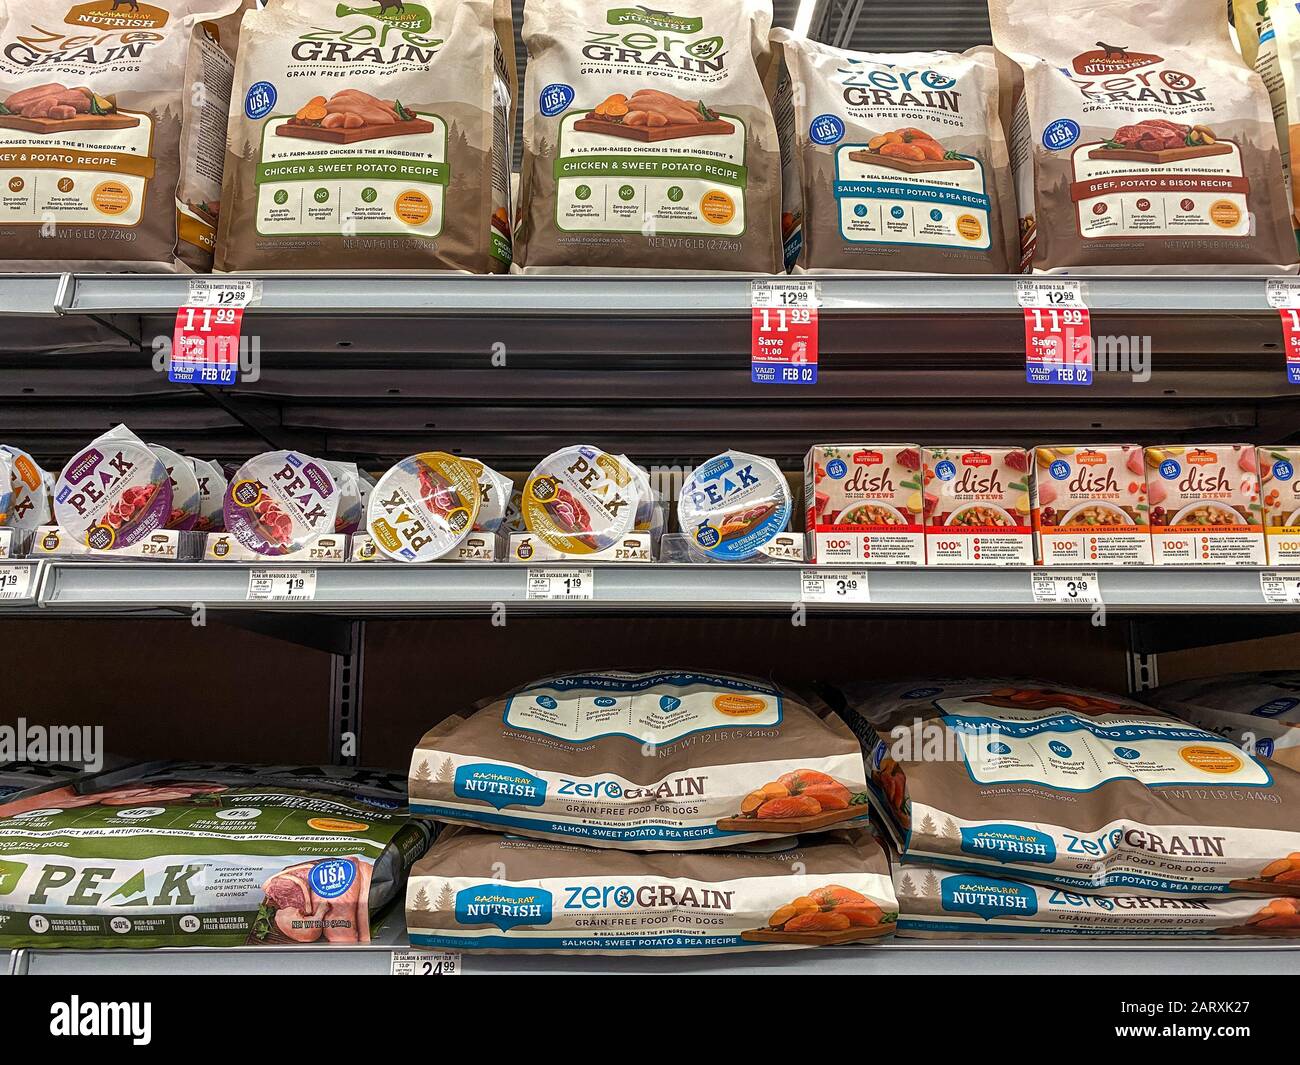 Orlando, FL/USA-1/29/20: A display of Rachael Ray Nutrish Dog Food at a Petsmart Superstore ready for pet owners to purchase for their pets. Stock Photo